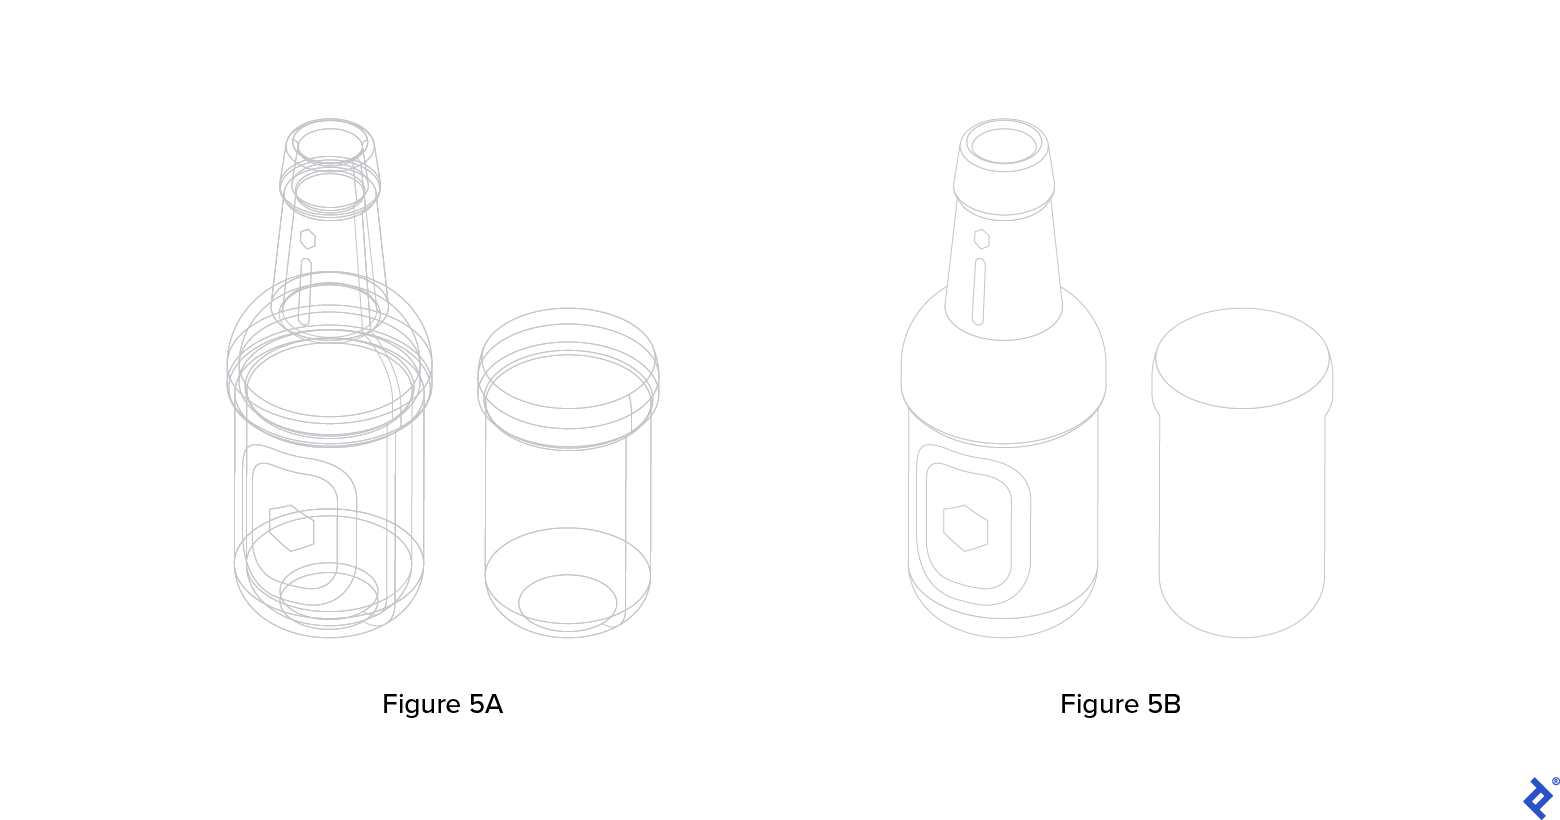 The isometric vector illustration needs to be simplified. Expand the bottle illustration and combine the segments so that they appear less cluttered.